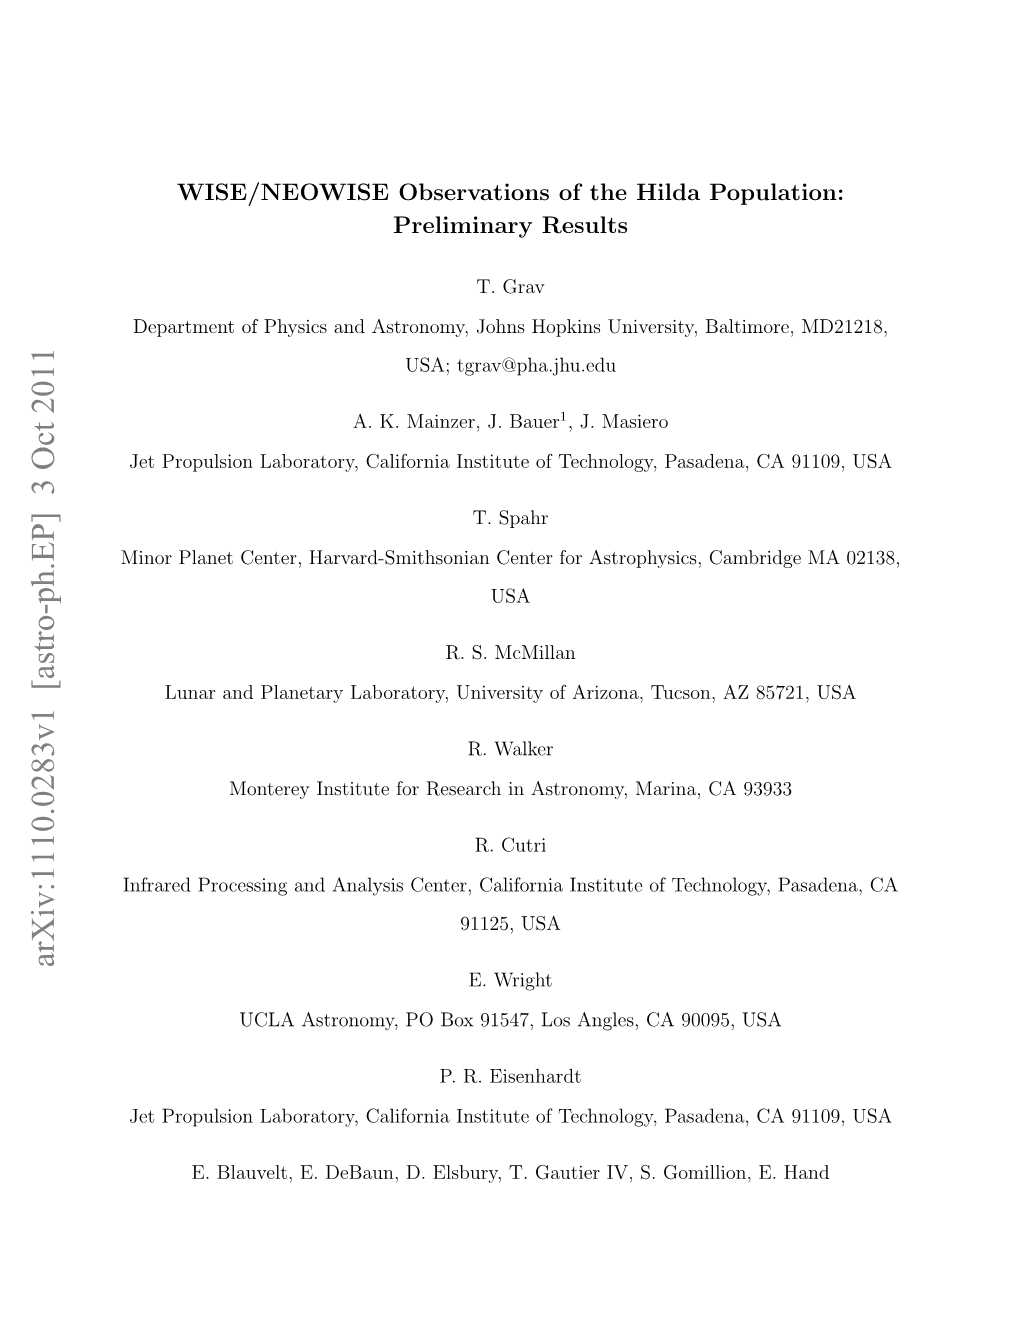 WISE/NEOWISE Observations of the Hilda Population: Preliminary Results